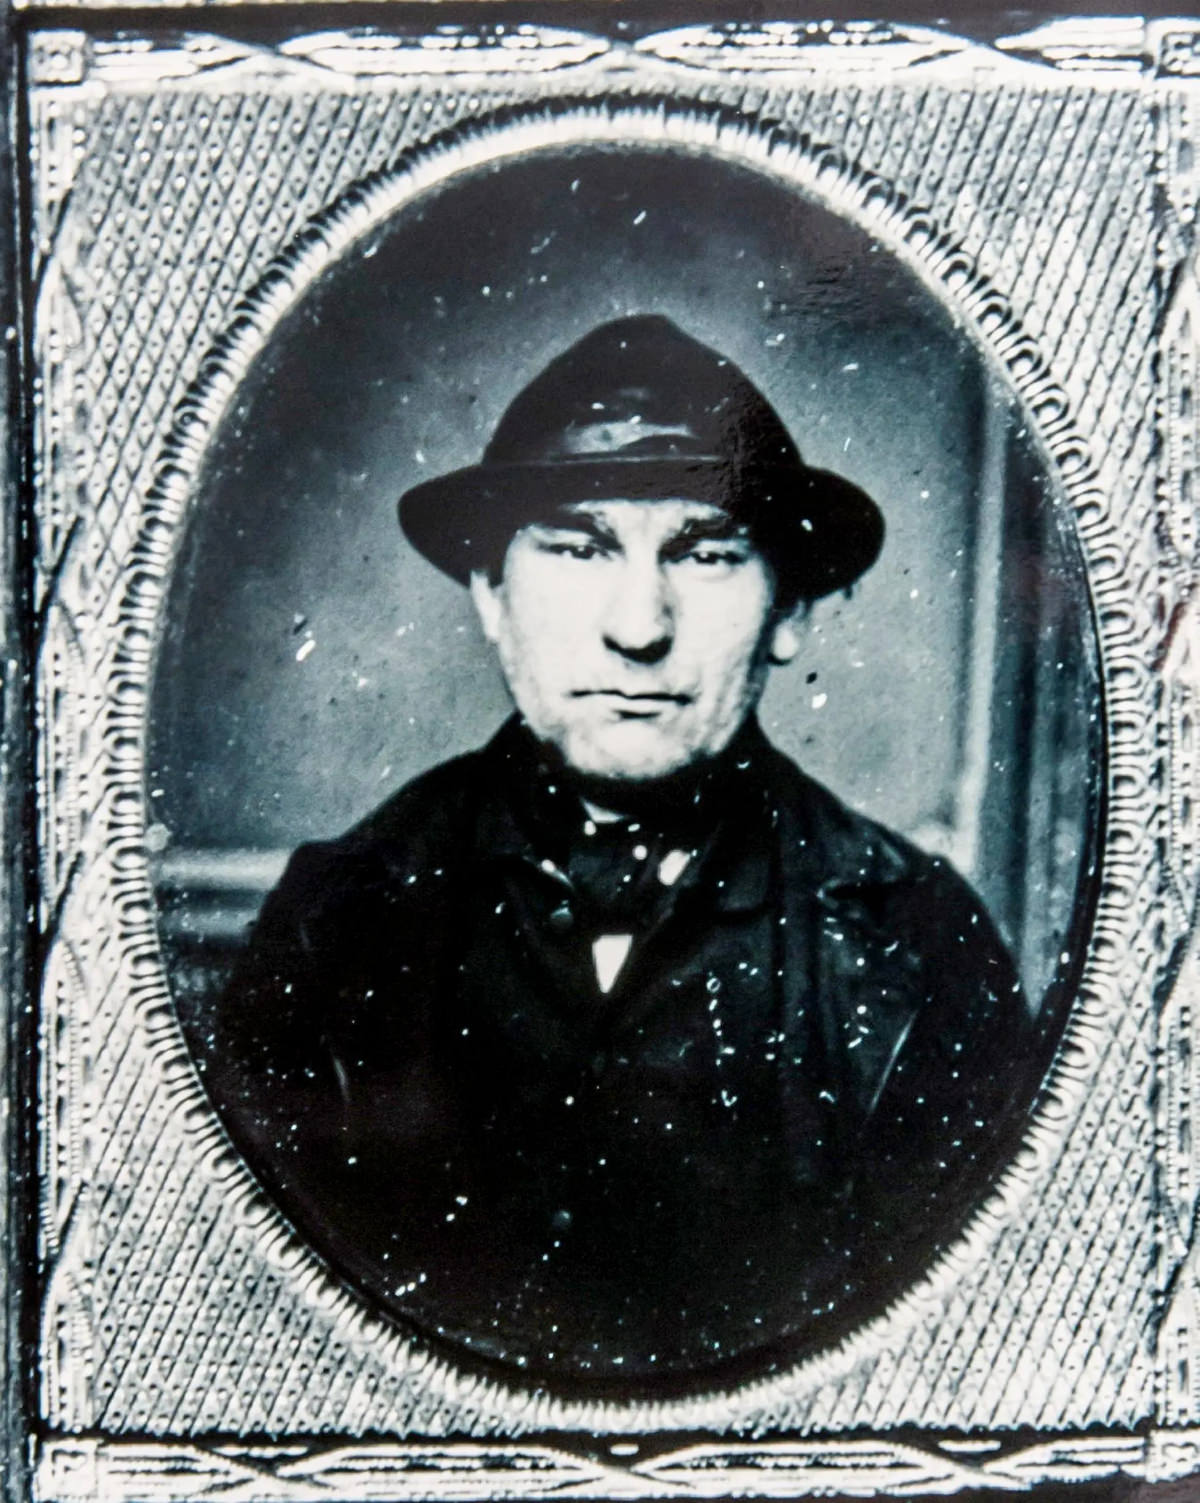 Mugshot of John Dale who is one of the earliest recorded examples of a joyrider after he was jailed in 1862 for stealing a horse and cart.